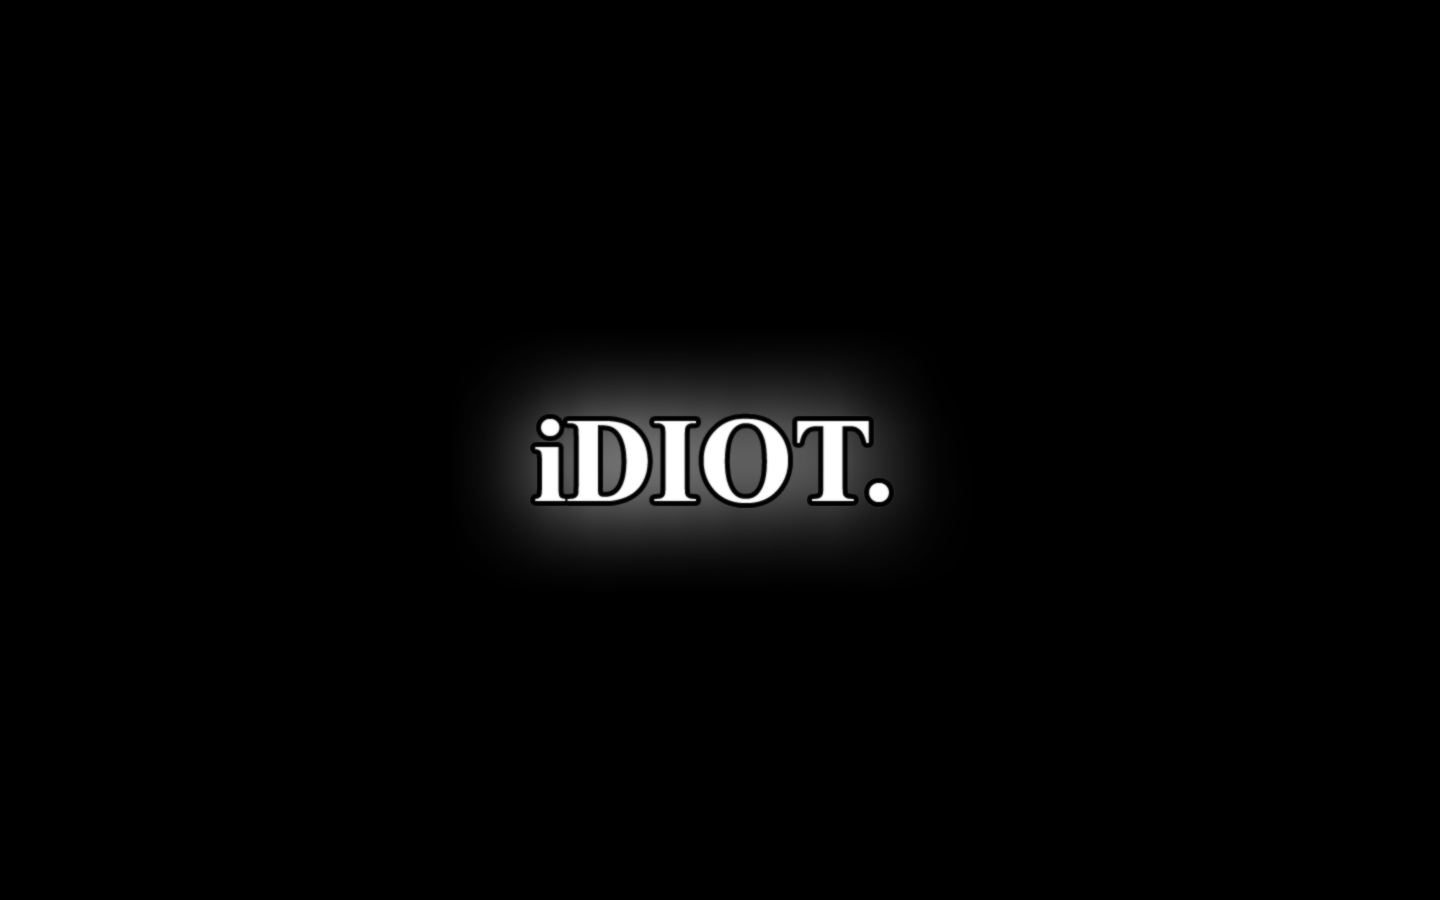 Funny Idiot Pictures Wallpaper Hd All HD Wallpapers 1440x900